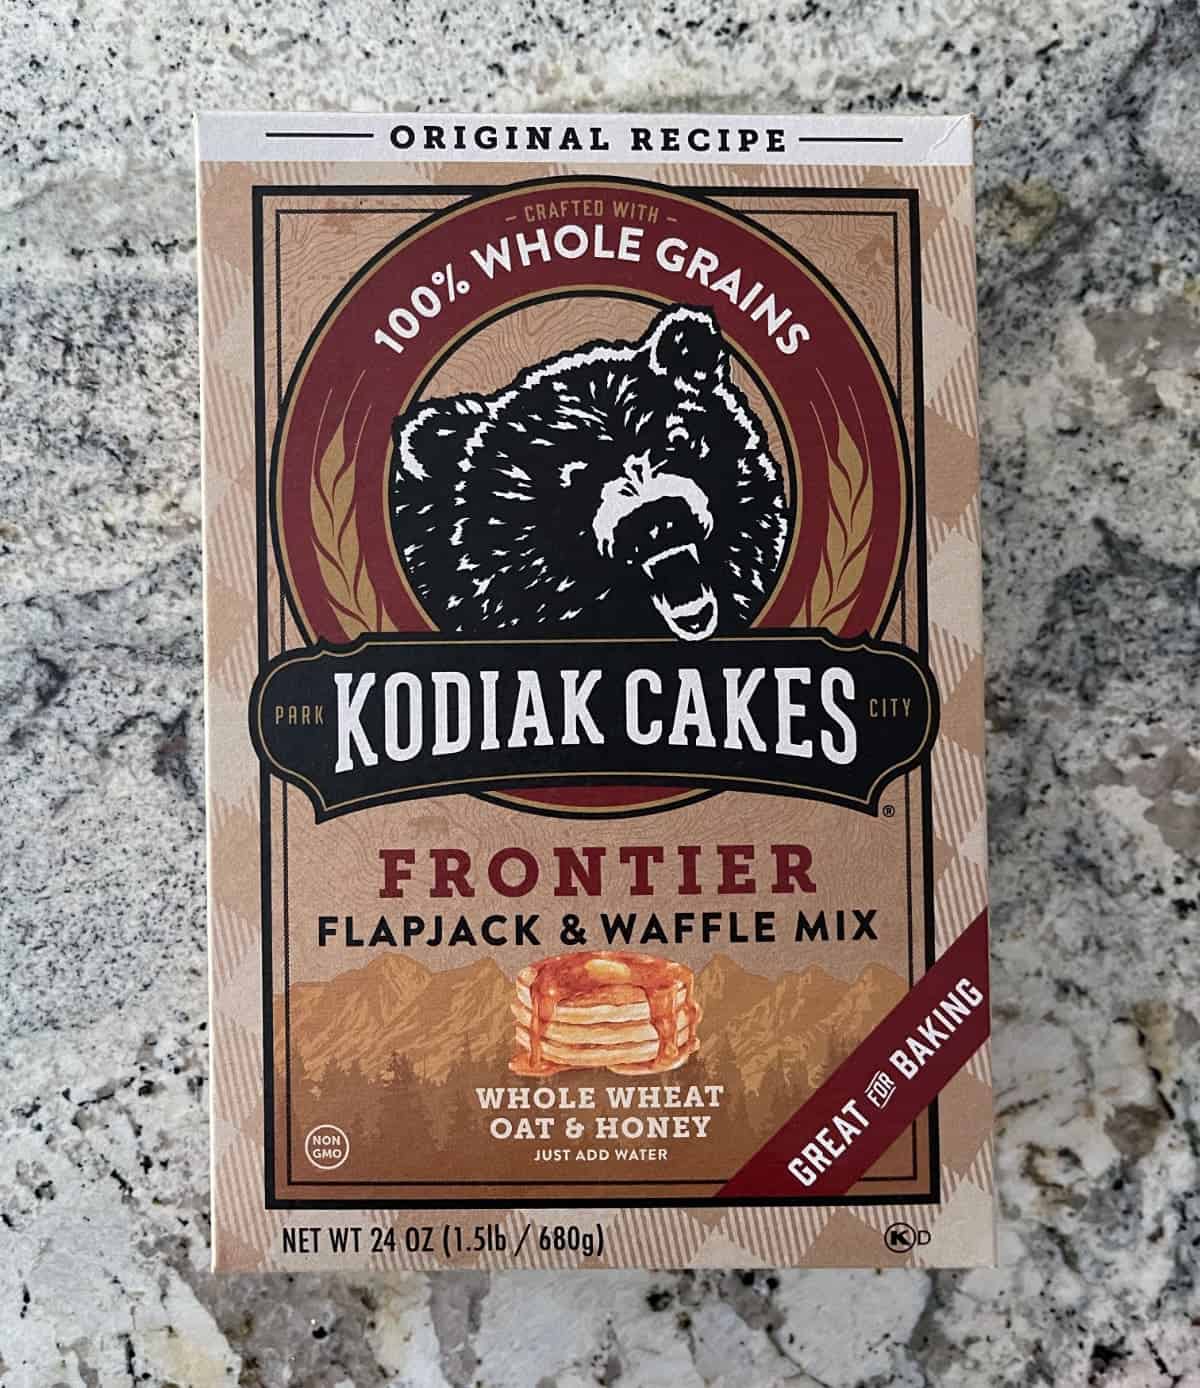 Package of Kodiak Cakes Frontier Flapjack and Waffle Mix made with whole wheat, oats and honey.